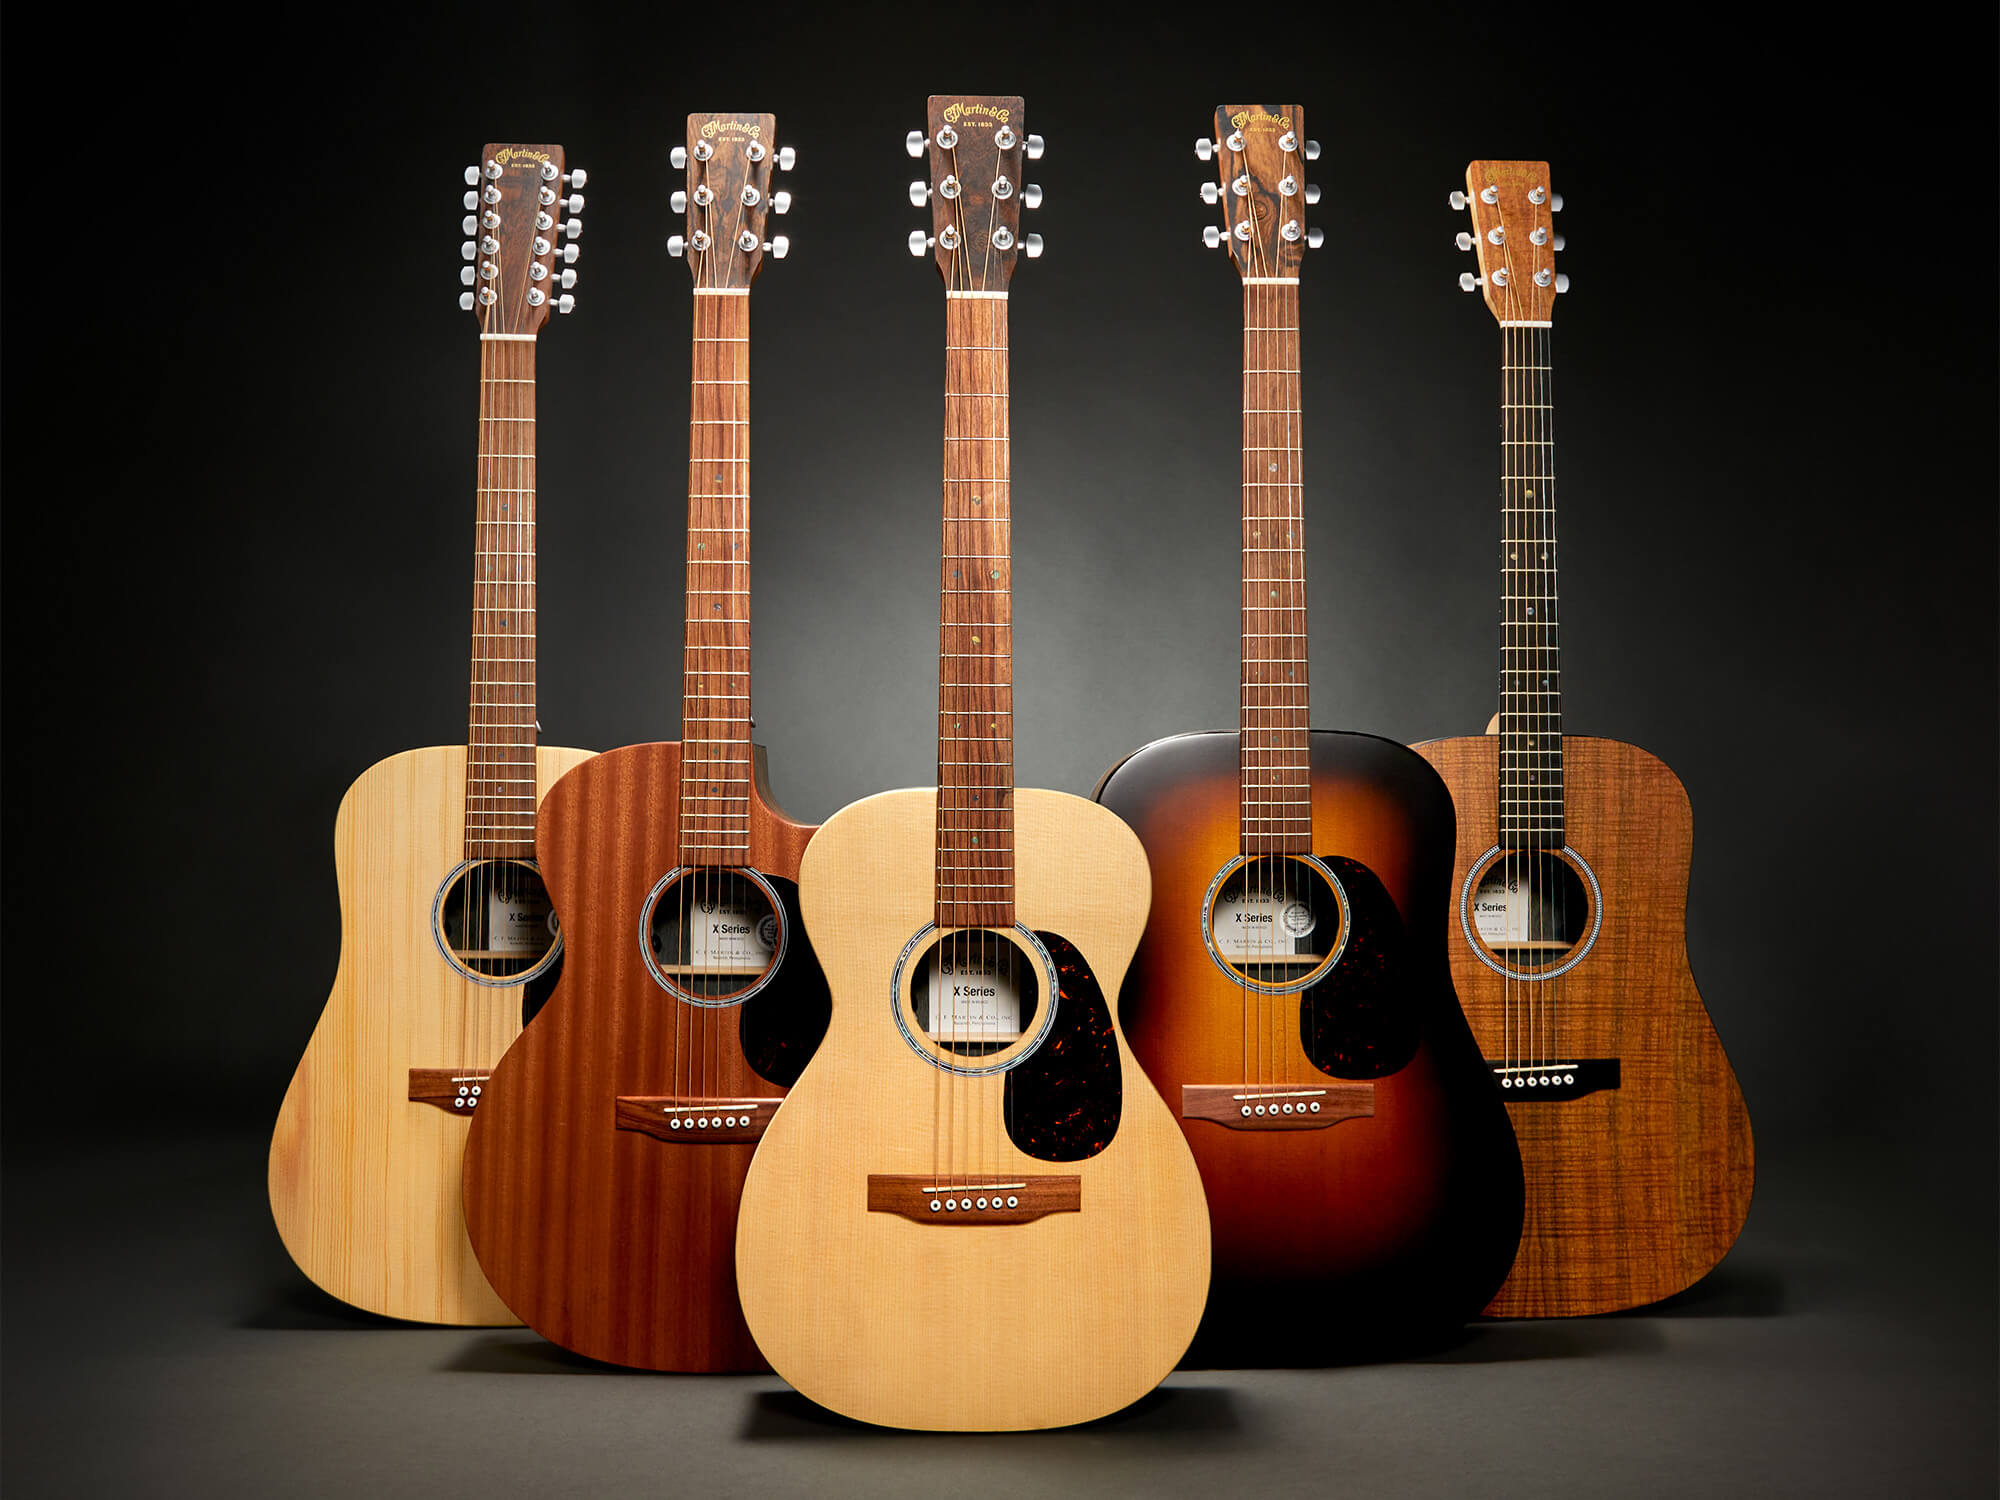 Remastered X Series models displayed in a line. Each shows a different finish.